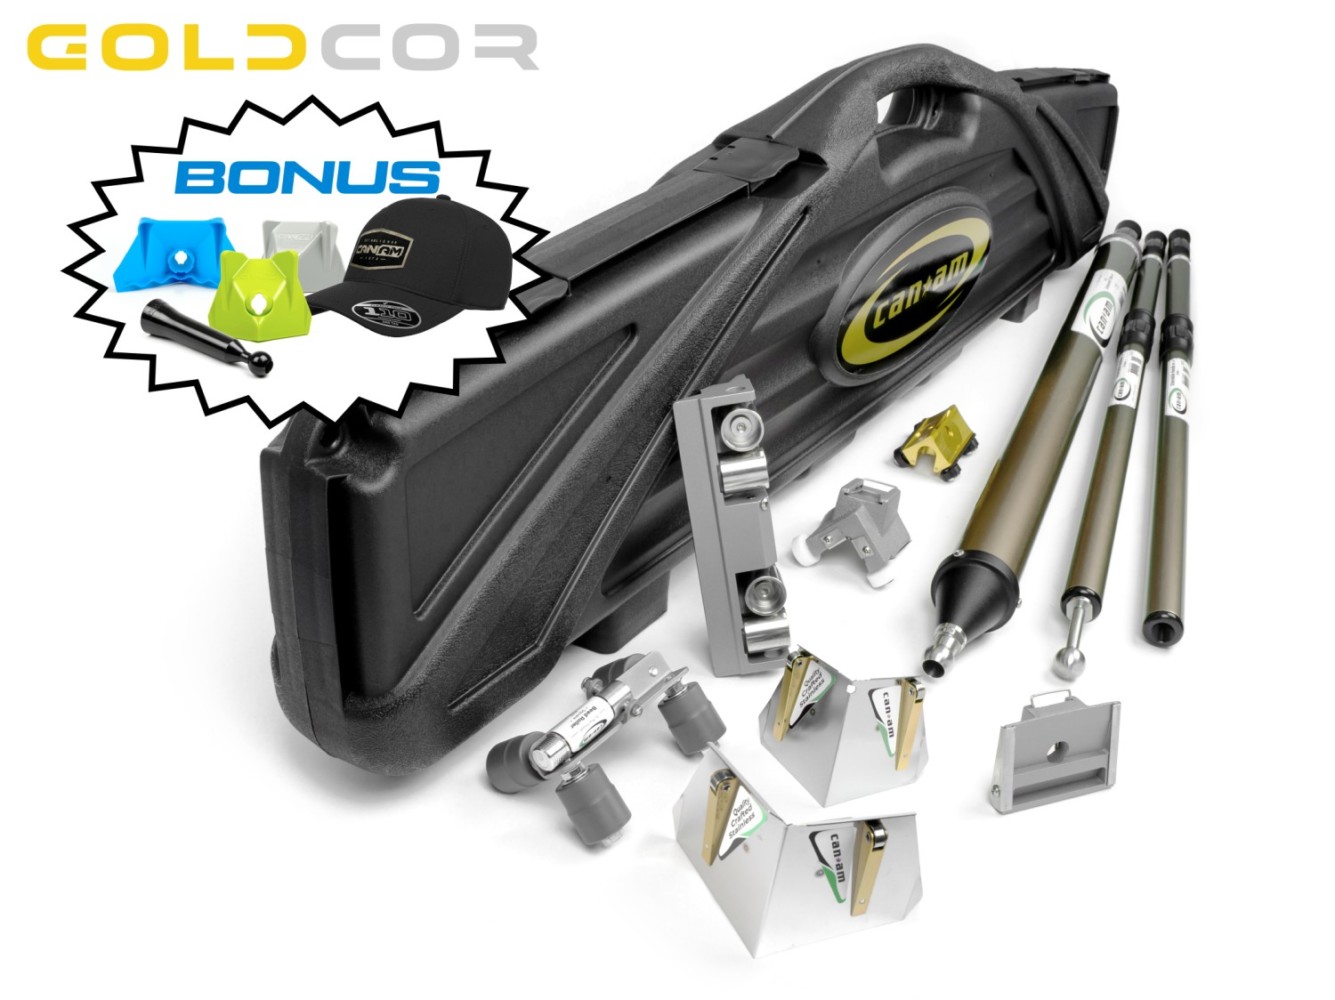 Lightweight Tool Set With Hard Carrying Case for Finishing Inside Corners CanAm Tool P501 Starter Set 